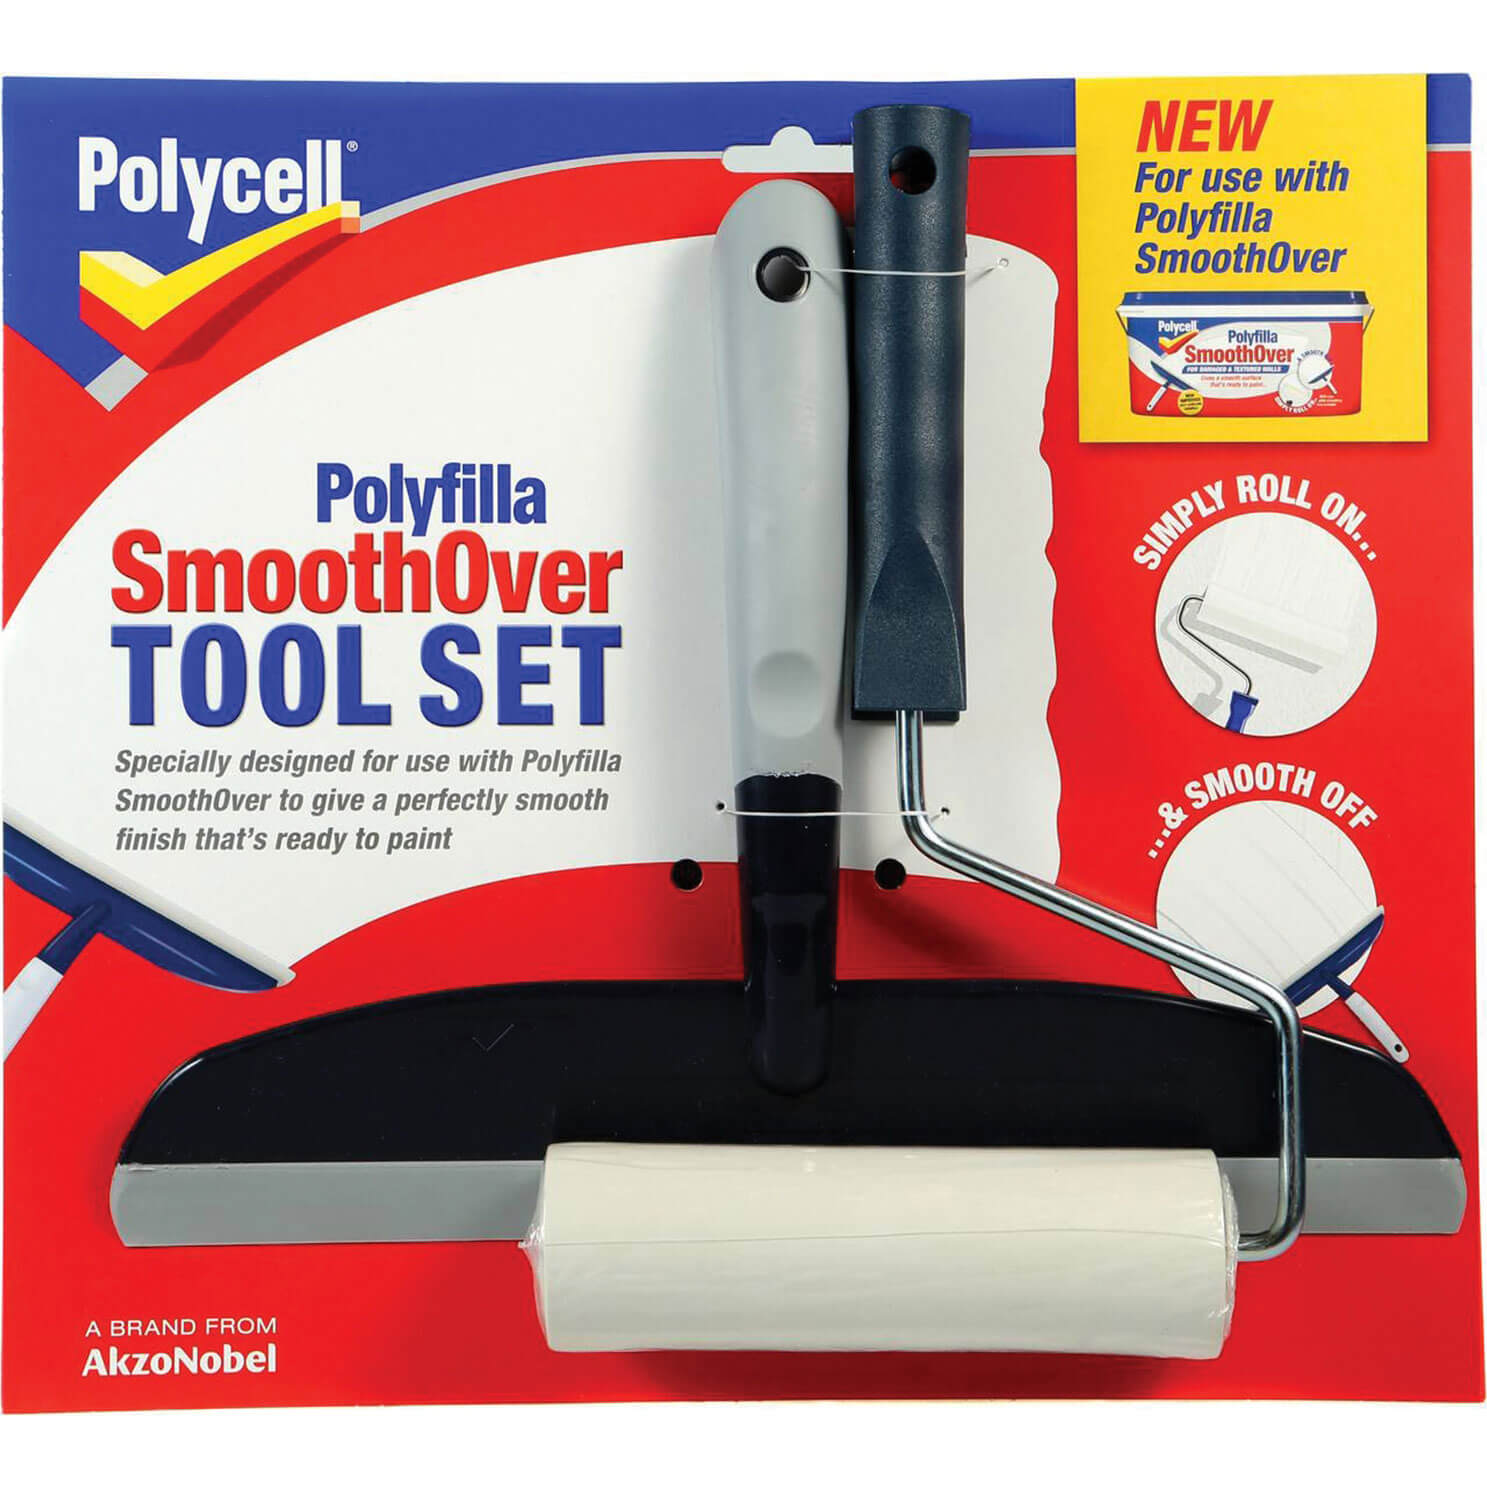 Photo of Polycell Polyfilla Smoothover Roller And Spreader Kit